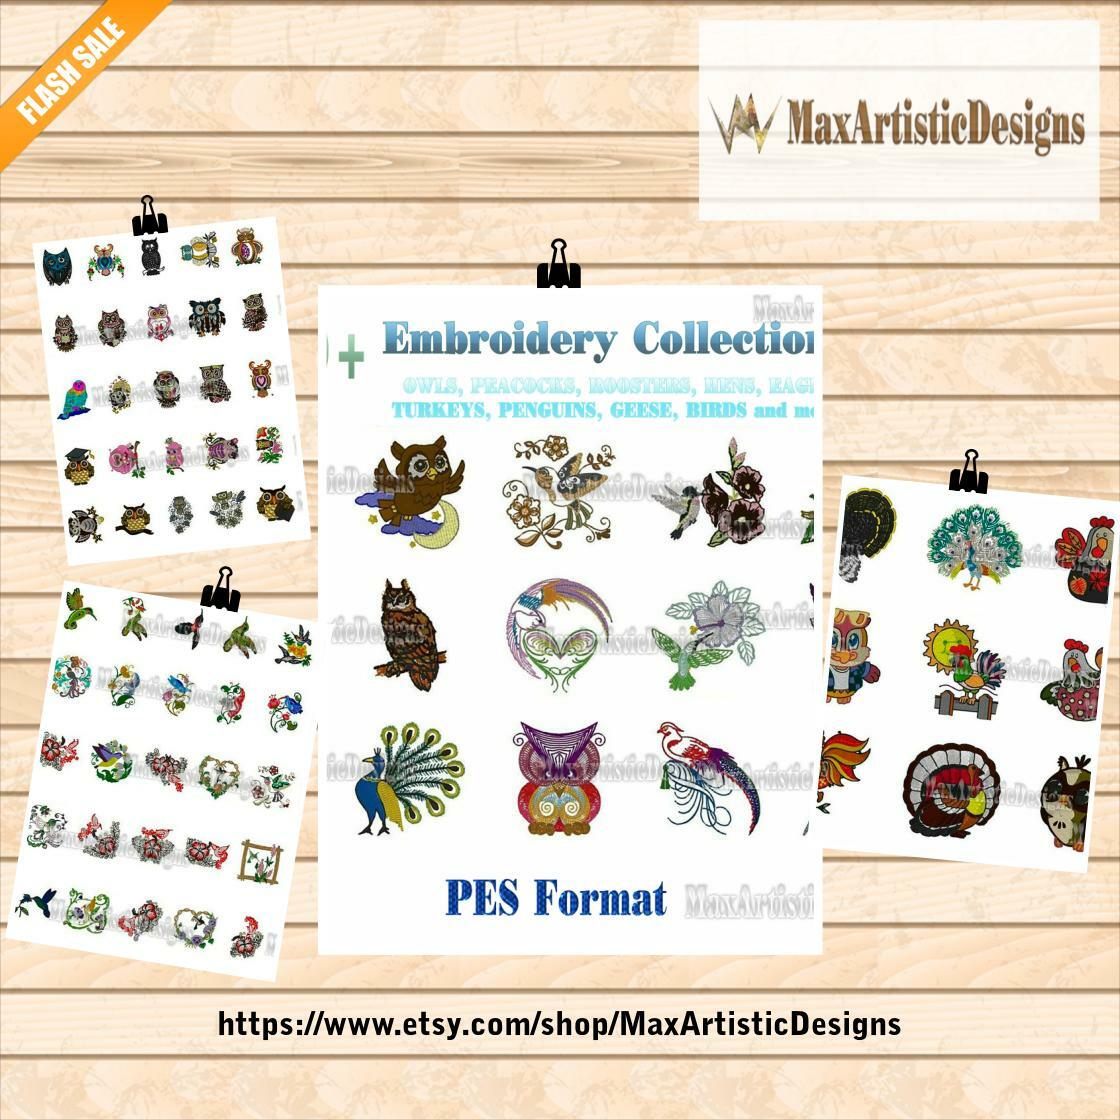 🐣. Offer Xtras! 1600+ embroidery owls peacocks chickens birds and more birds embroidery machine files pes emb hus -Download for $10.00 #EmbroideryDesigns #EmbroideryPattern